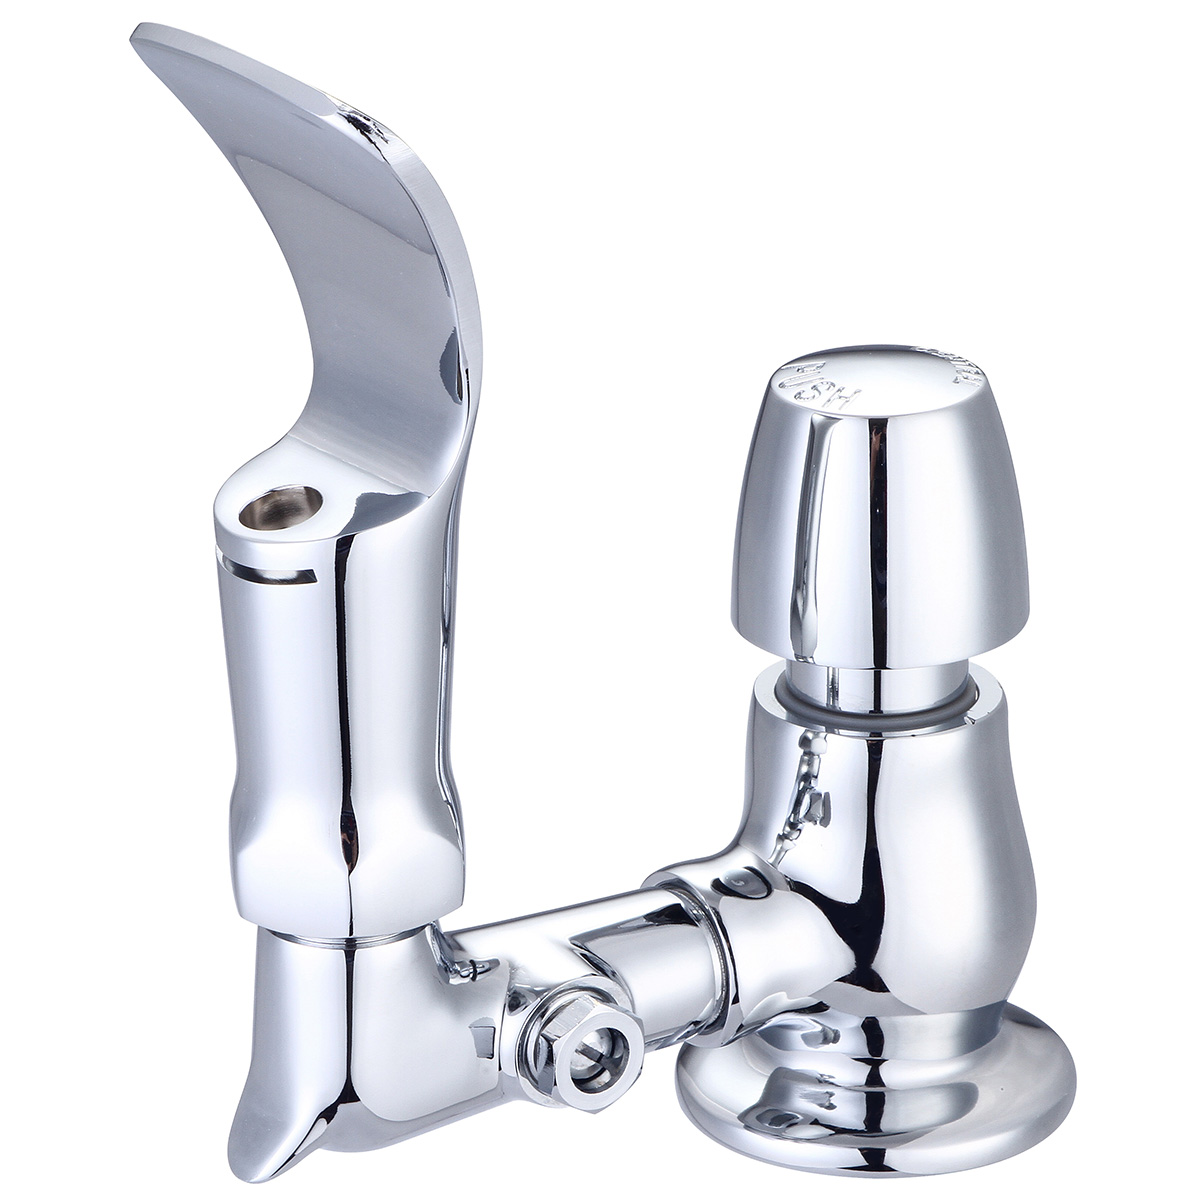 0364-n2 Drinking Faucet - Polished Chrome